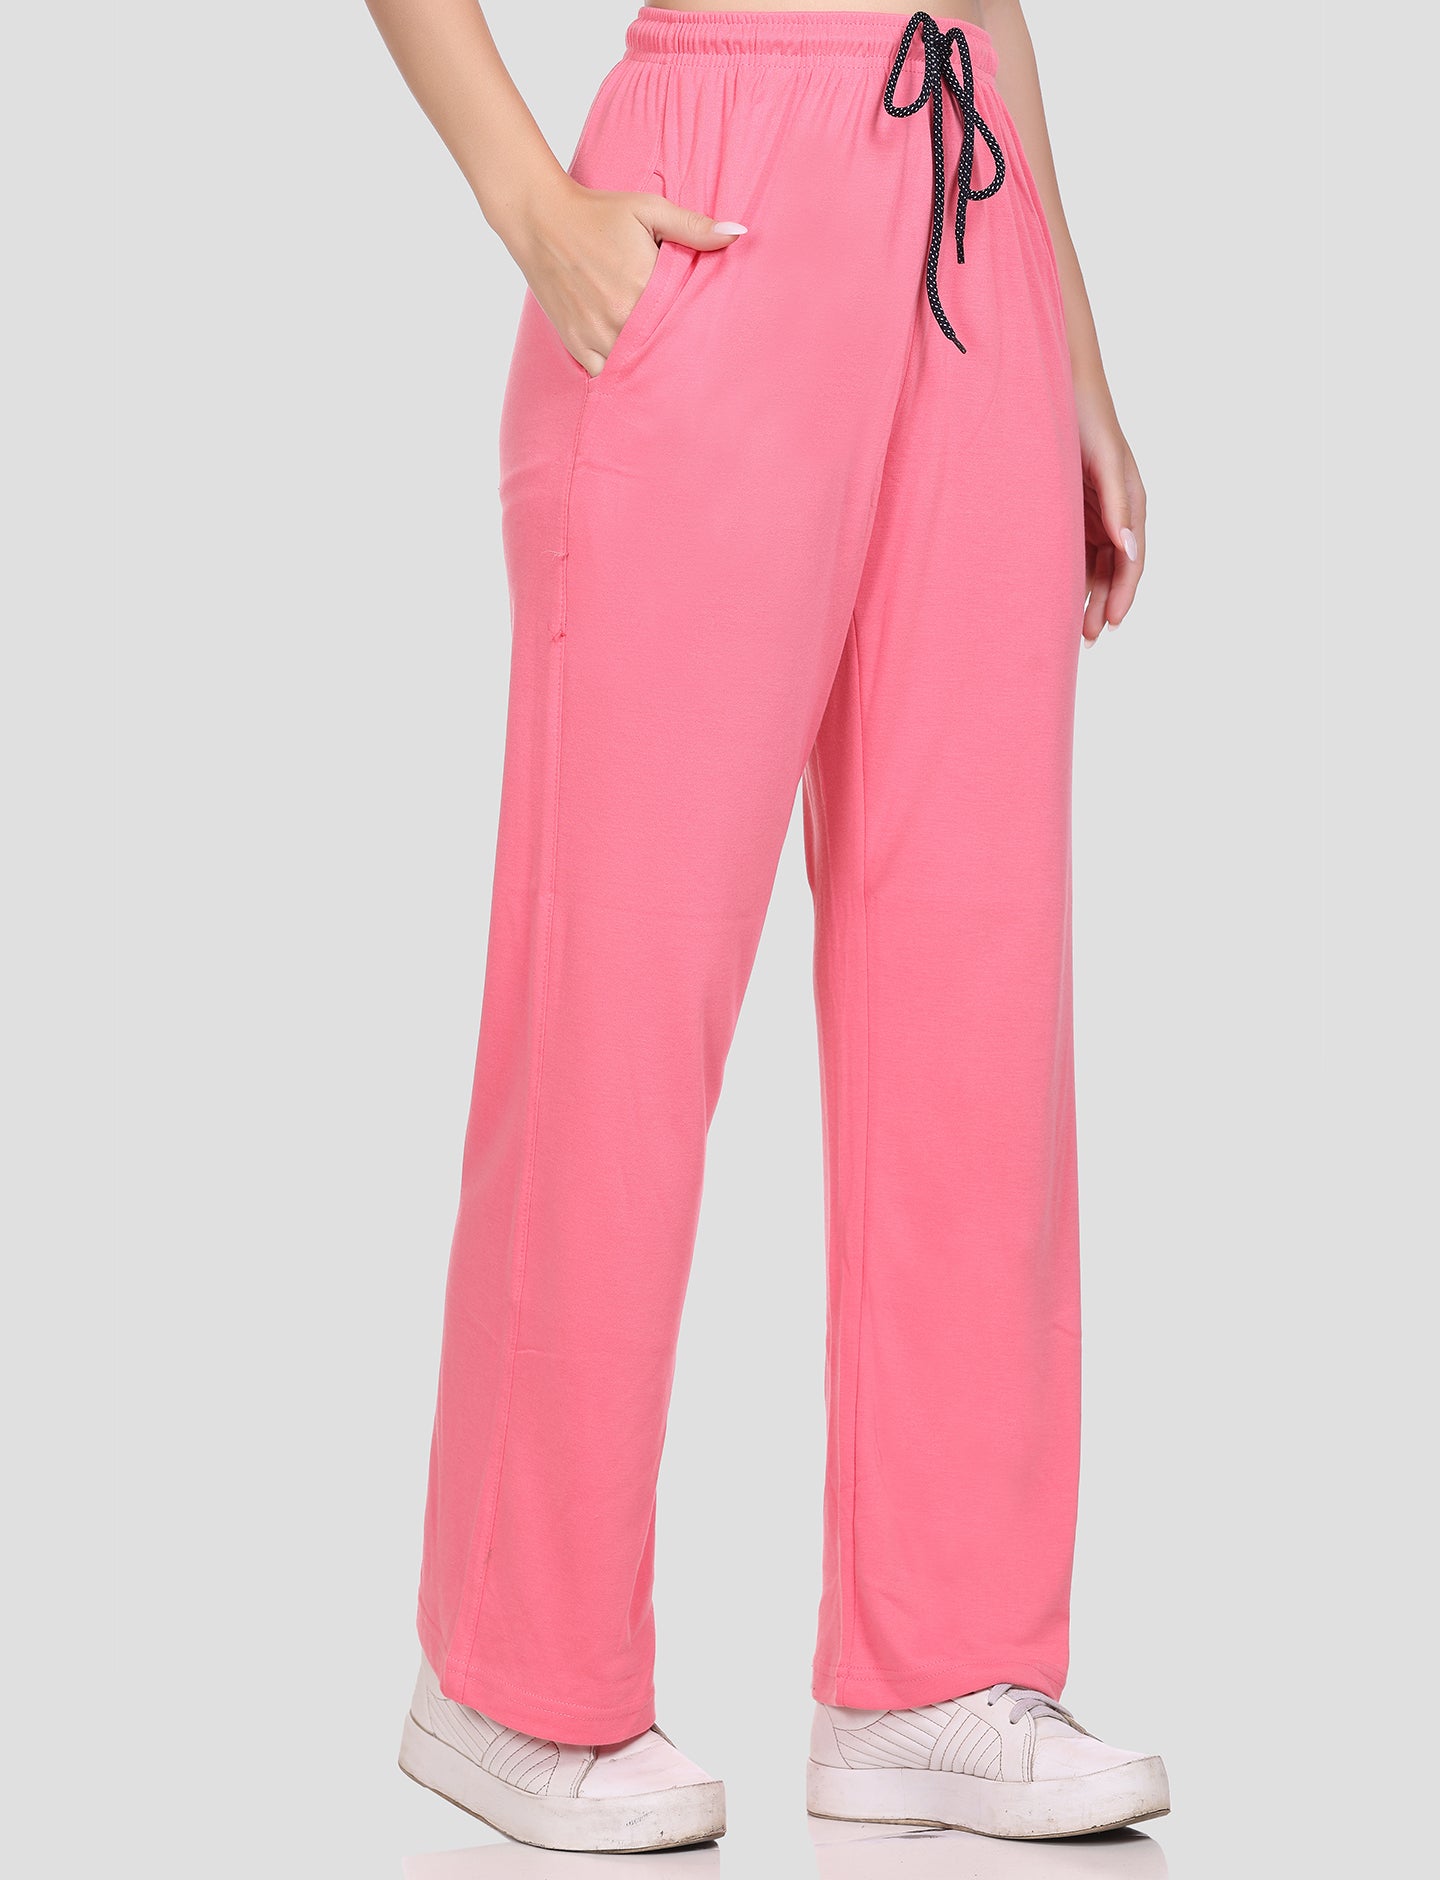 Buy Comfortable High Waist Flannel Flame Pink Pants for Women